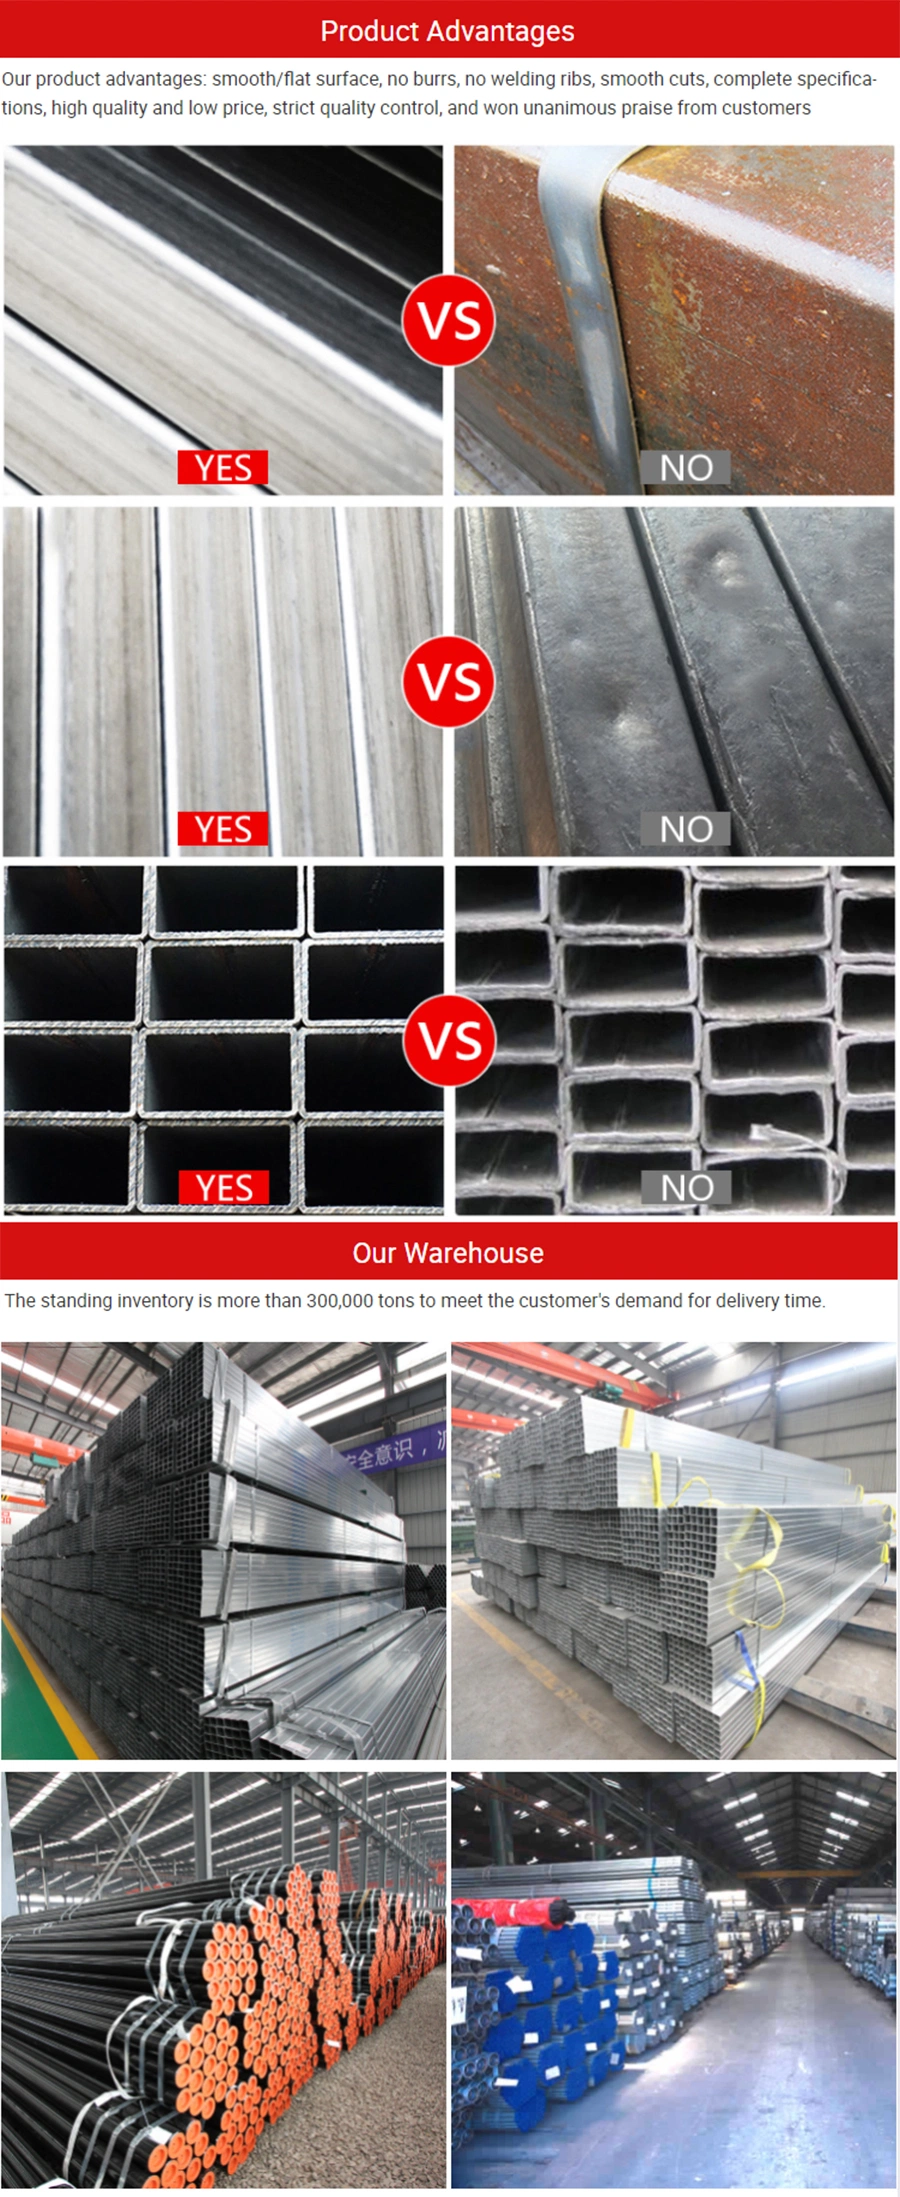 China Manufacturer Supply Low Price ASTM 1 Inch Square Iron Pipe/ Black Square Tube/ Galvanized Rectangular Steel Pipe for Building, Construction Material